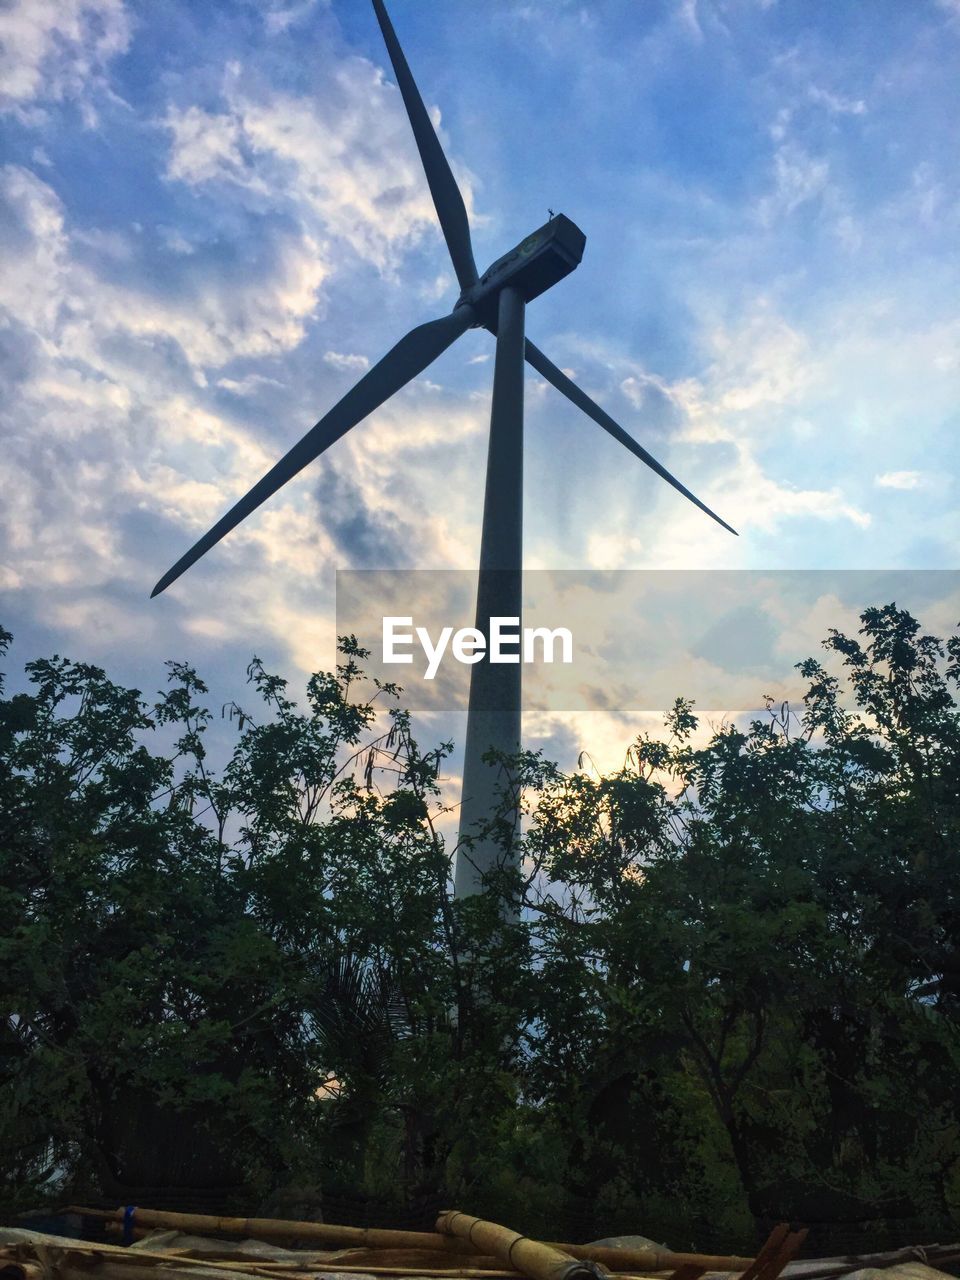 LOW ANGLE VIEW OF TRADITIONAL WINDMILL AGAINST CLOUDY SKY